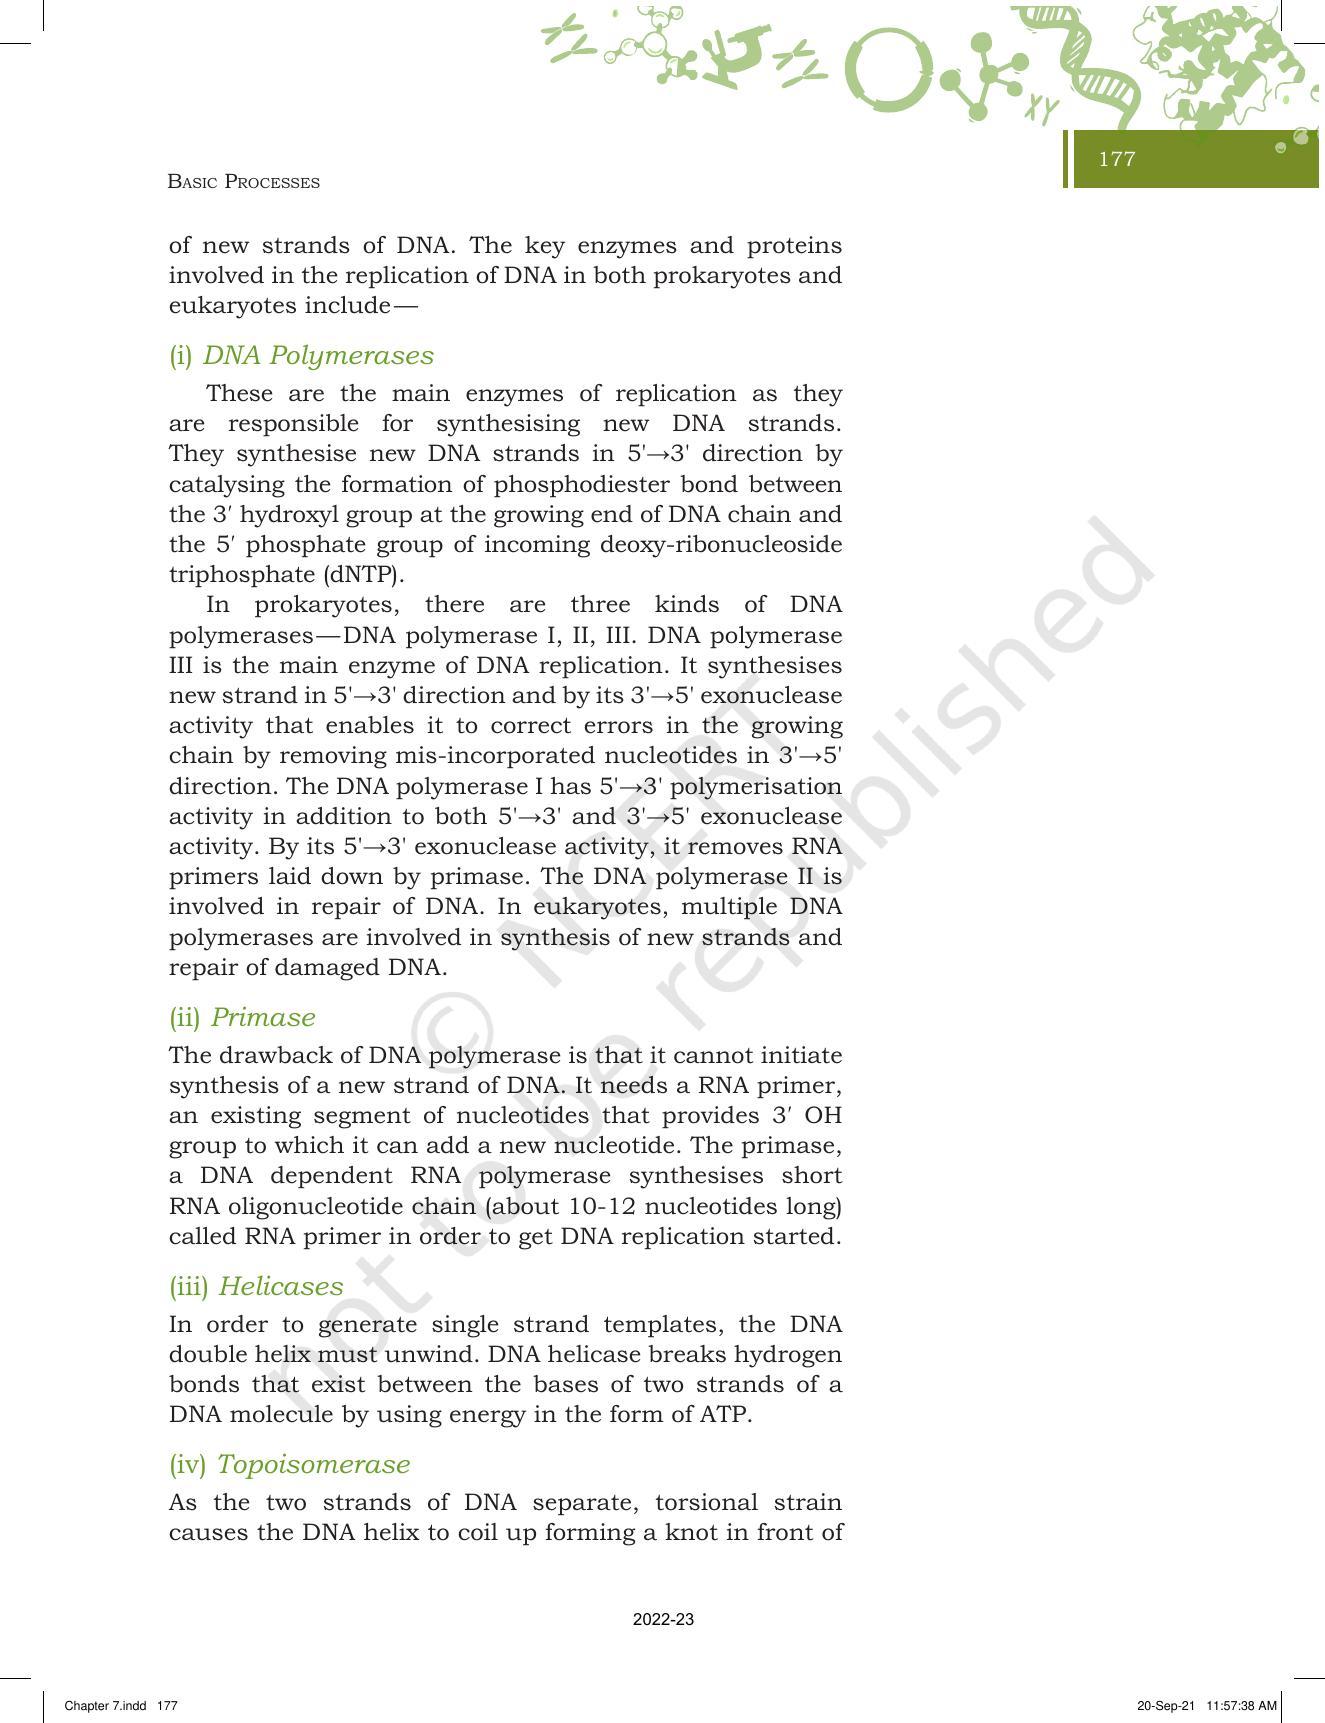 NCERT Book for Class 11 Biotechnology Chapter 7 Basic Processes - Page 14